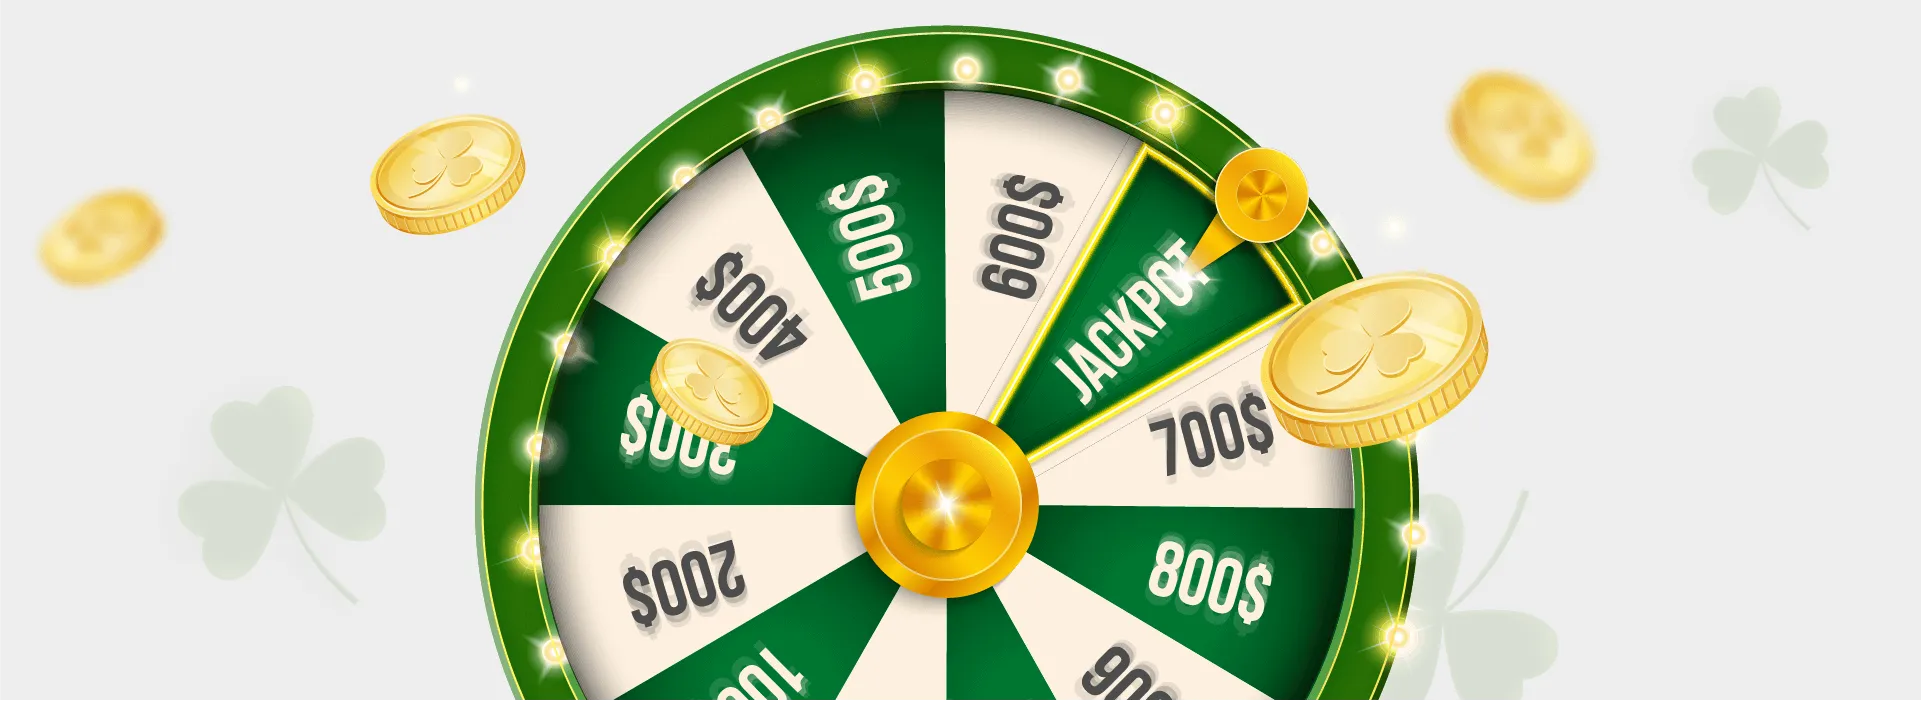 image of a wheel with coins